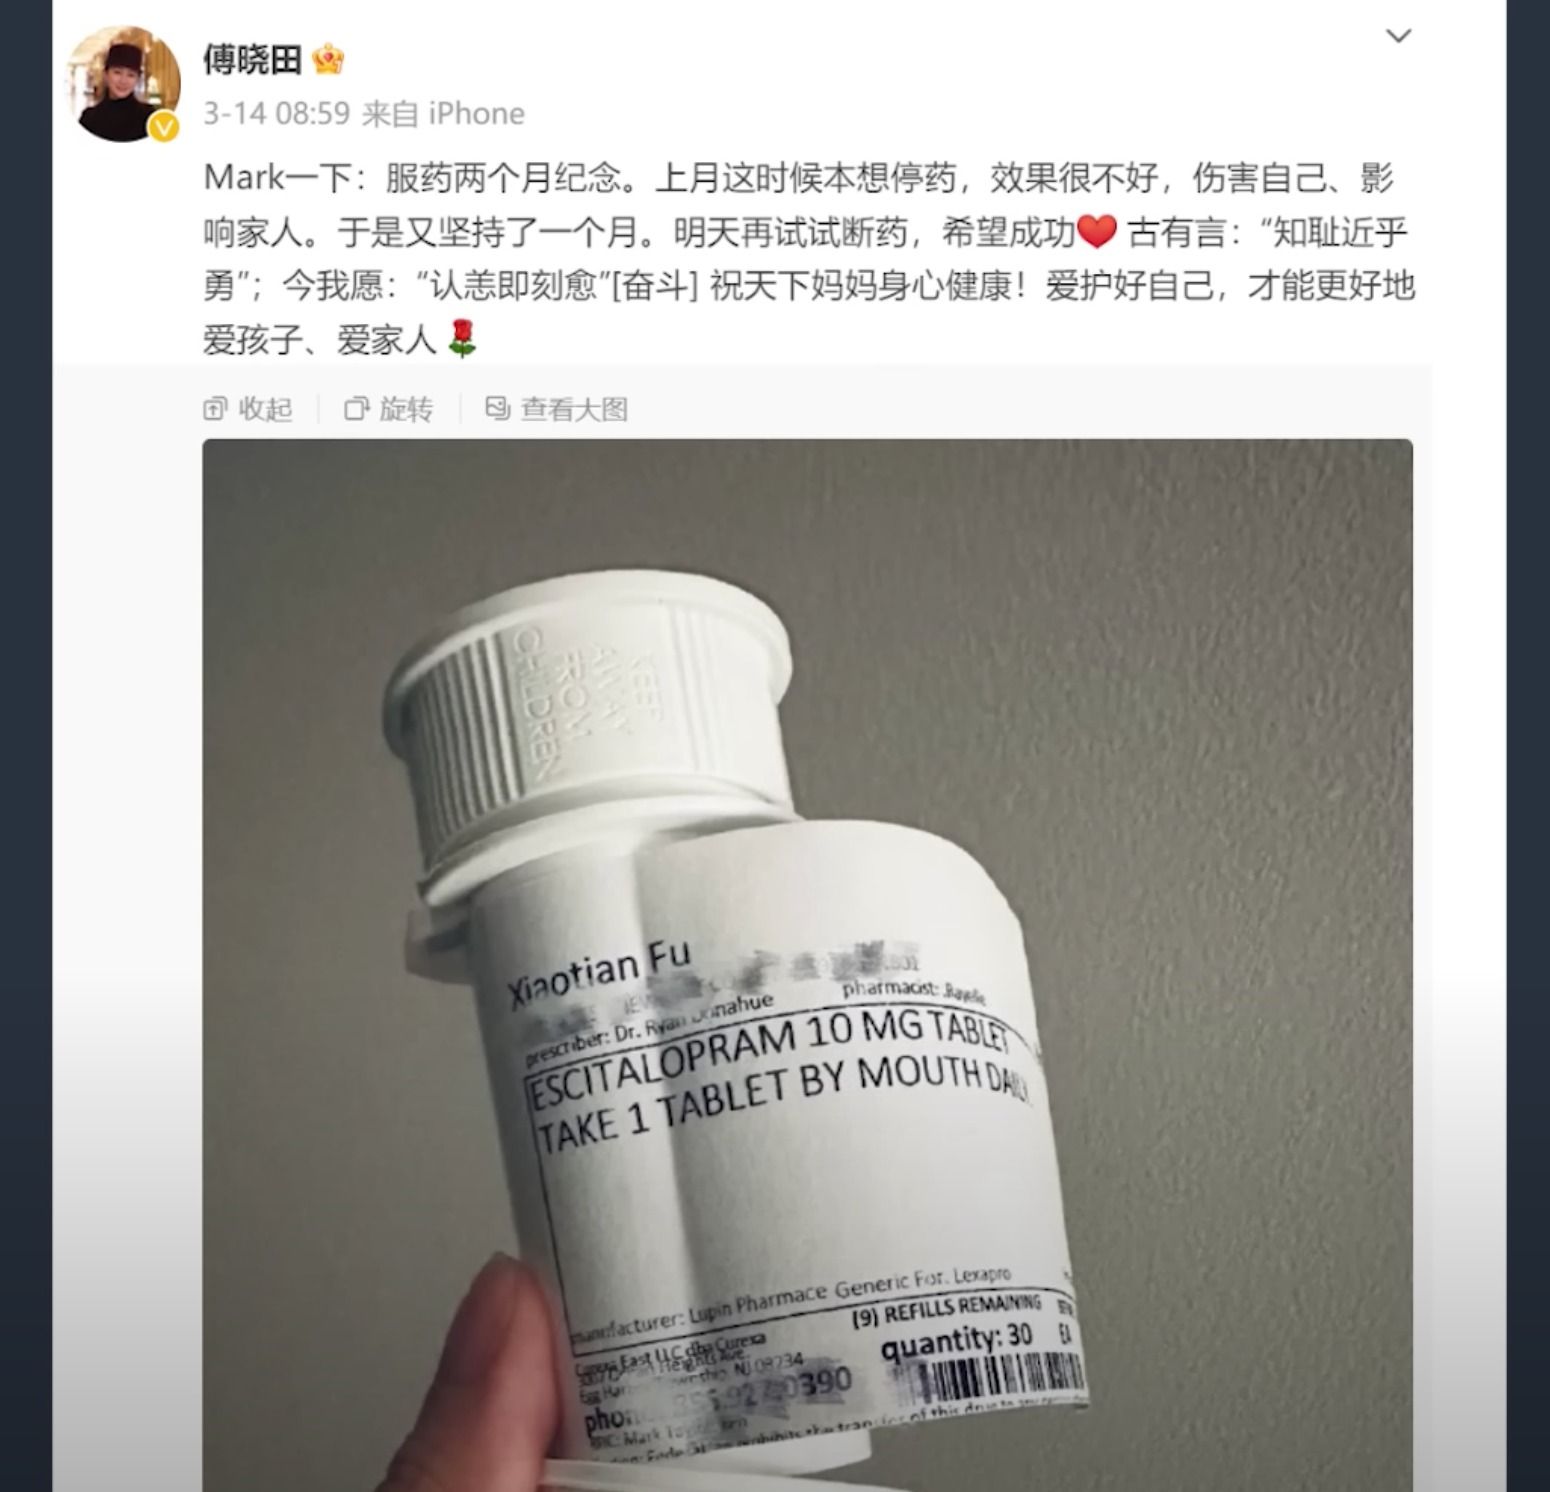 Fu Xiaotian is taking medicine for severe depression and generalized anxiety disorder